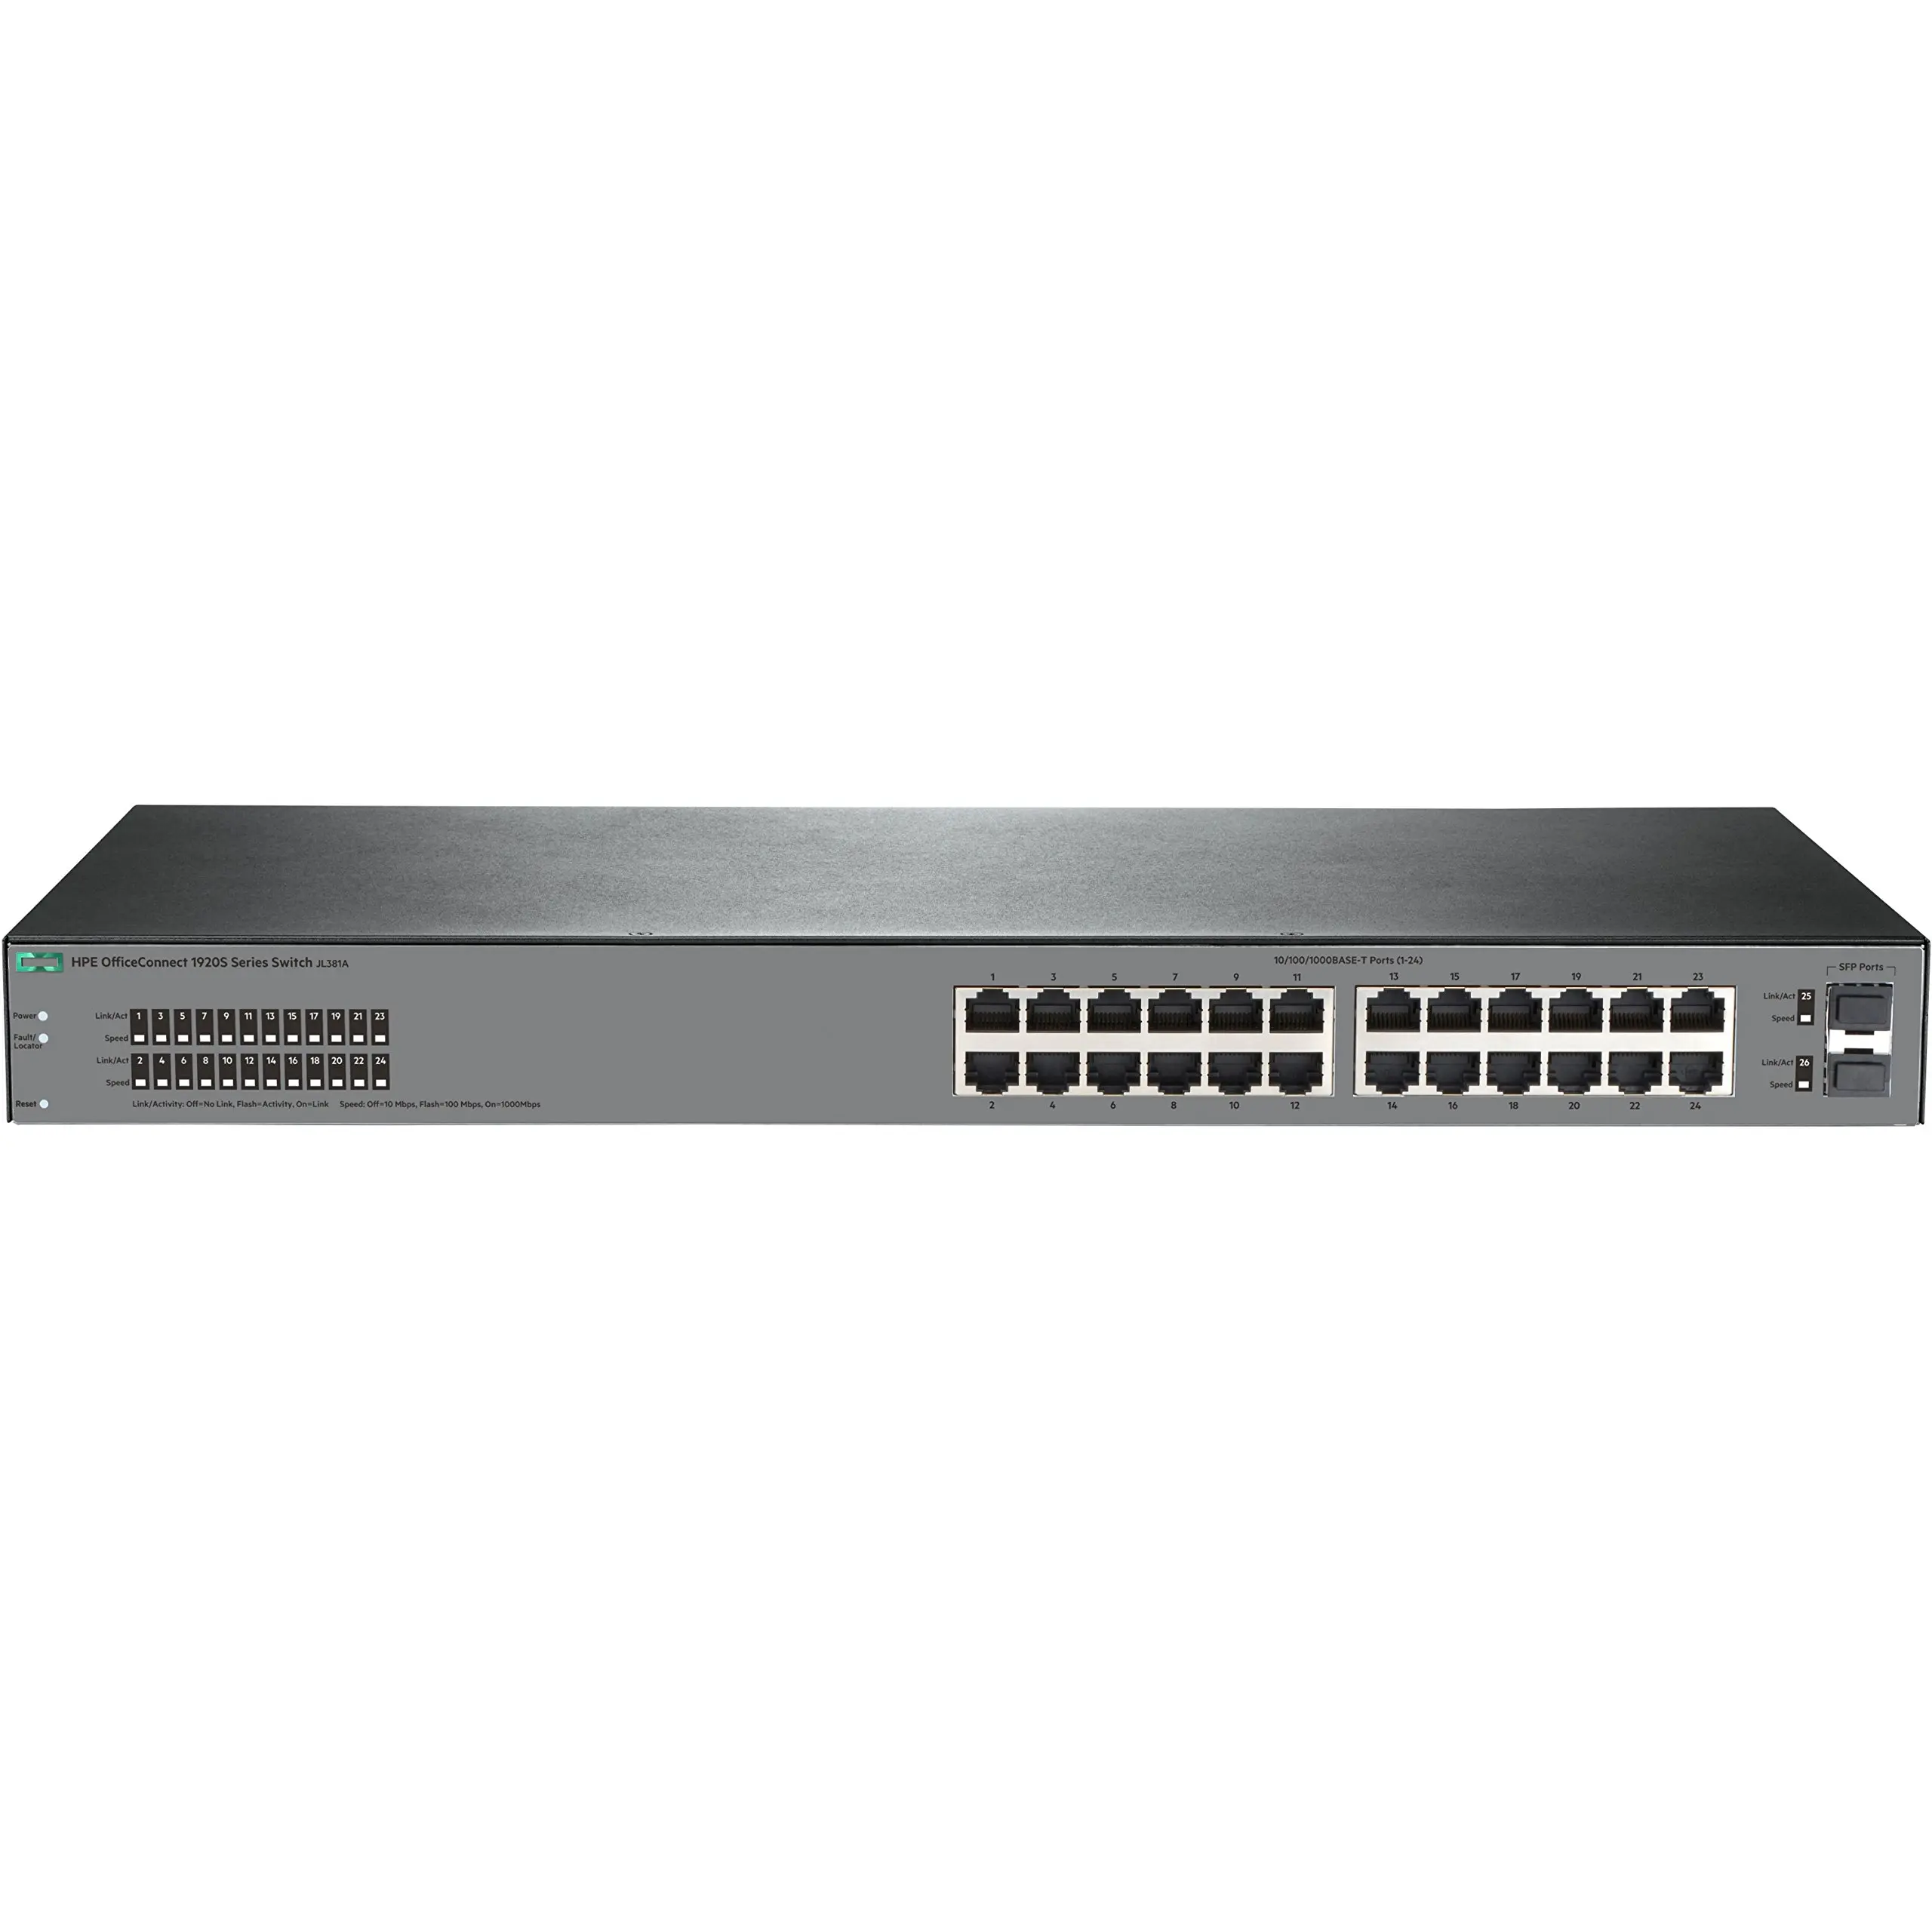 Reliable and powerful networking: hpe officeconnect 1920s 24g 2sfp